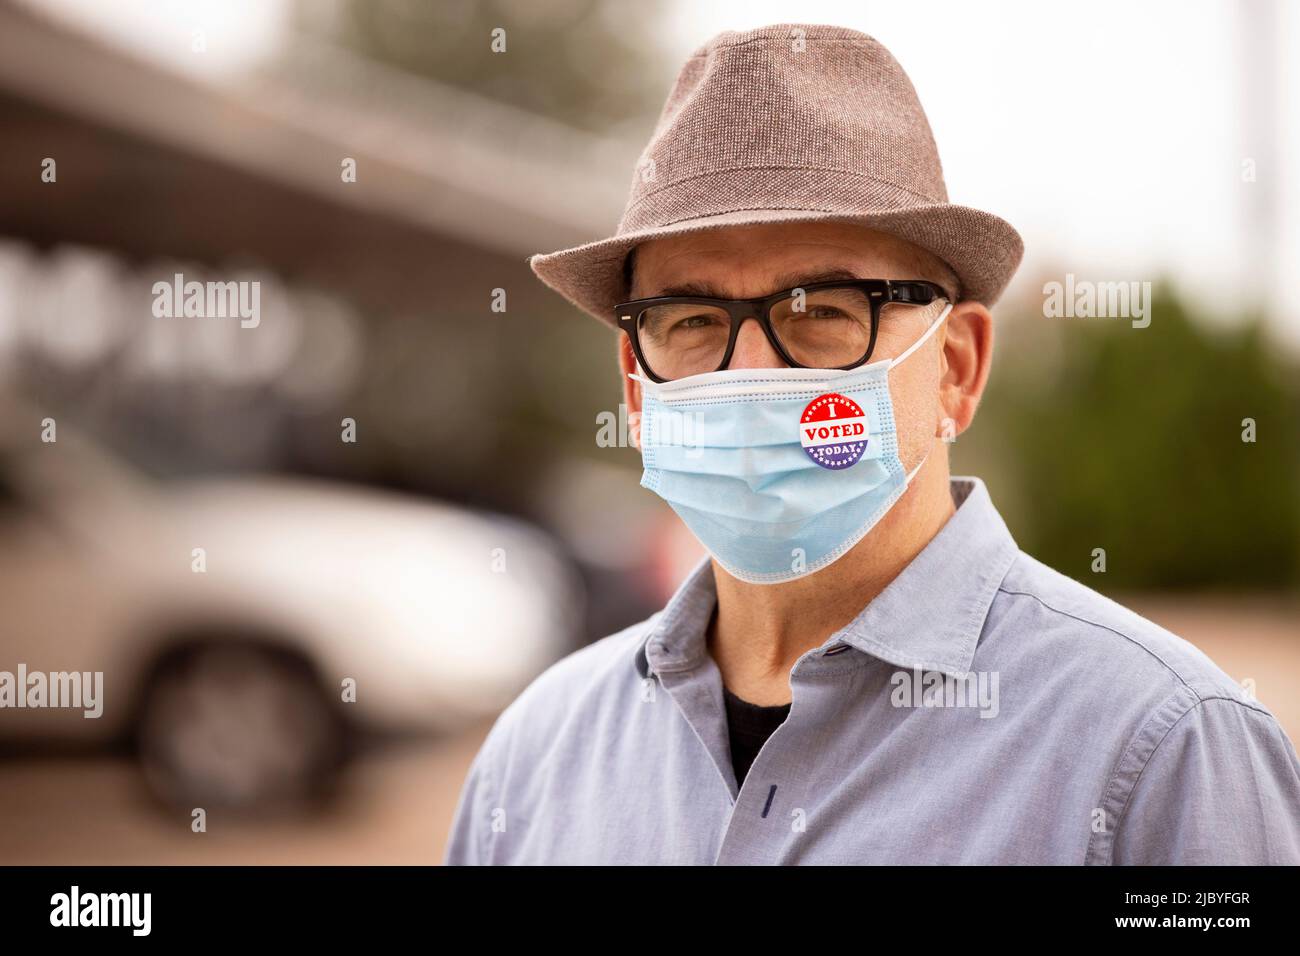 Older Caucasian male with glasses and fedora, wearing a mask and an I Voted Today sticker on the mask Stock Photo